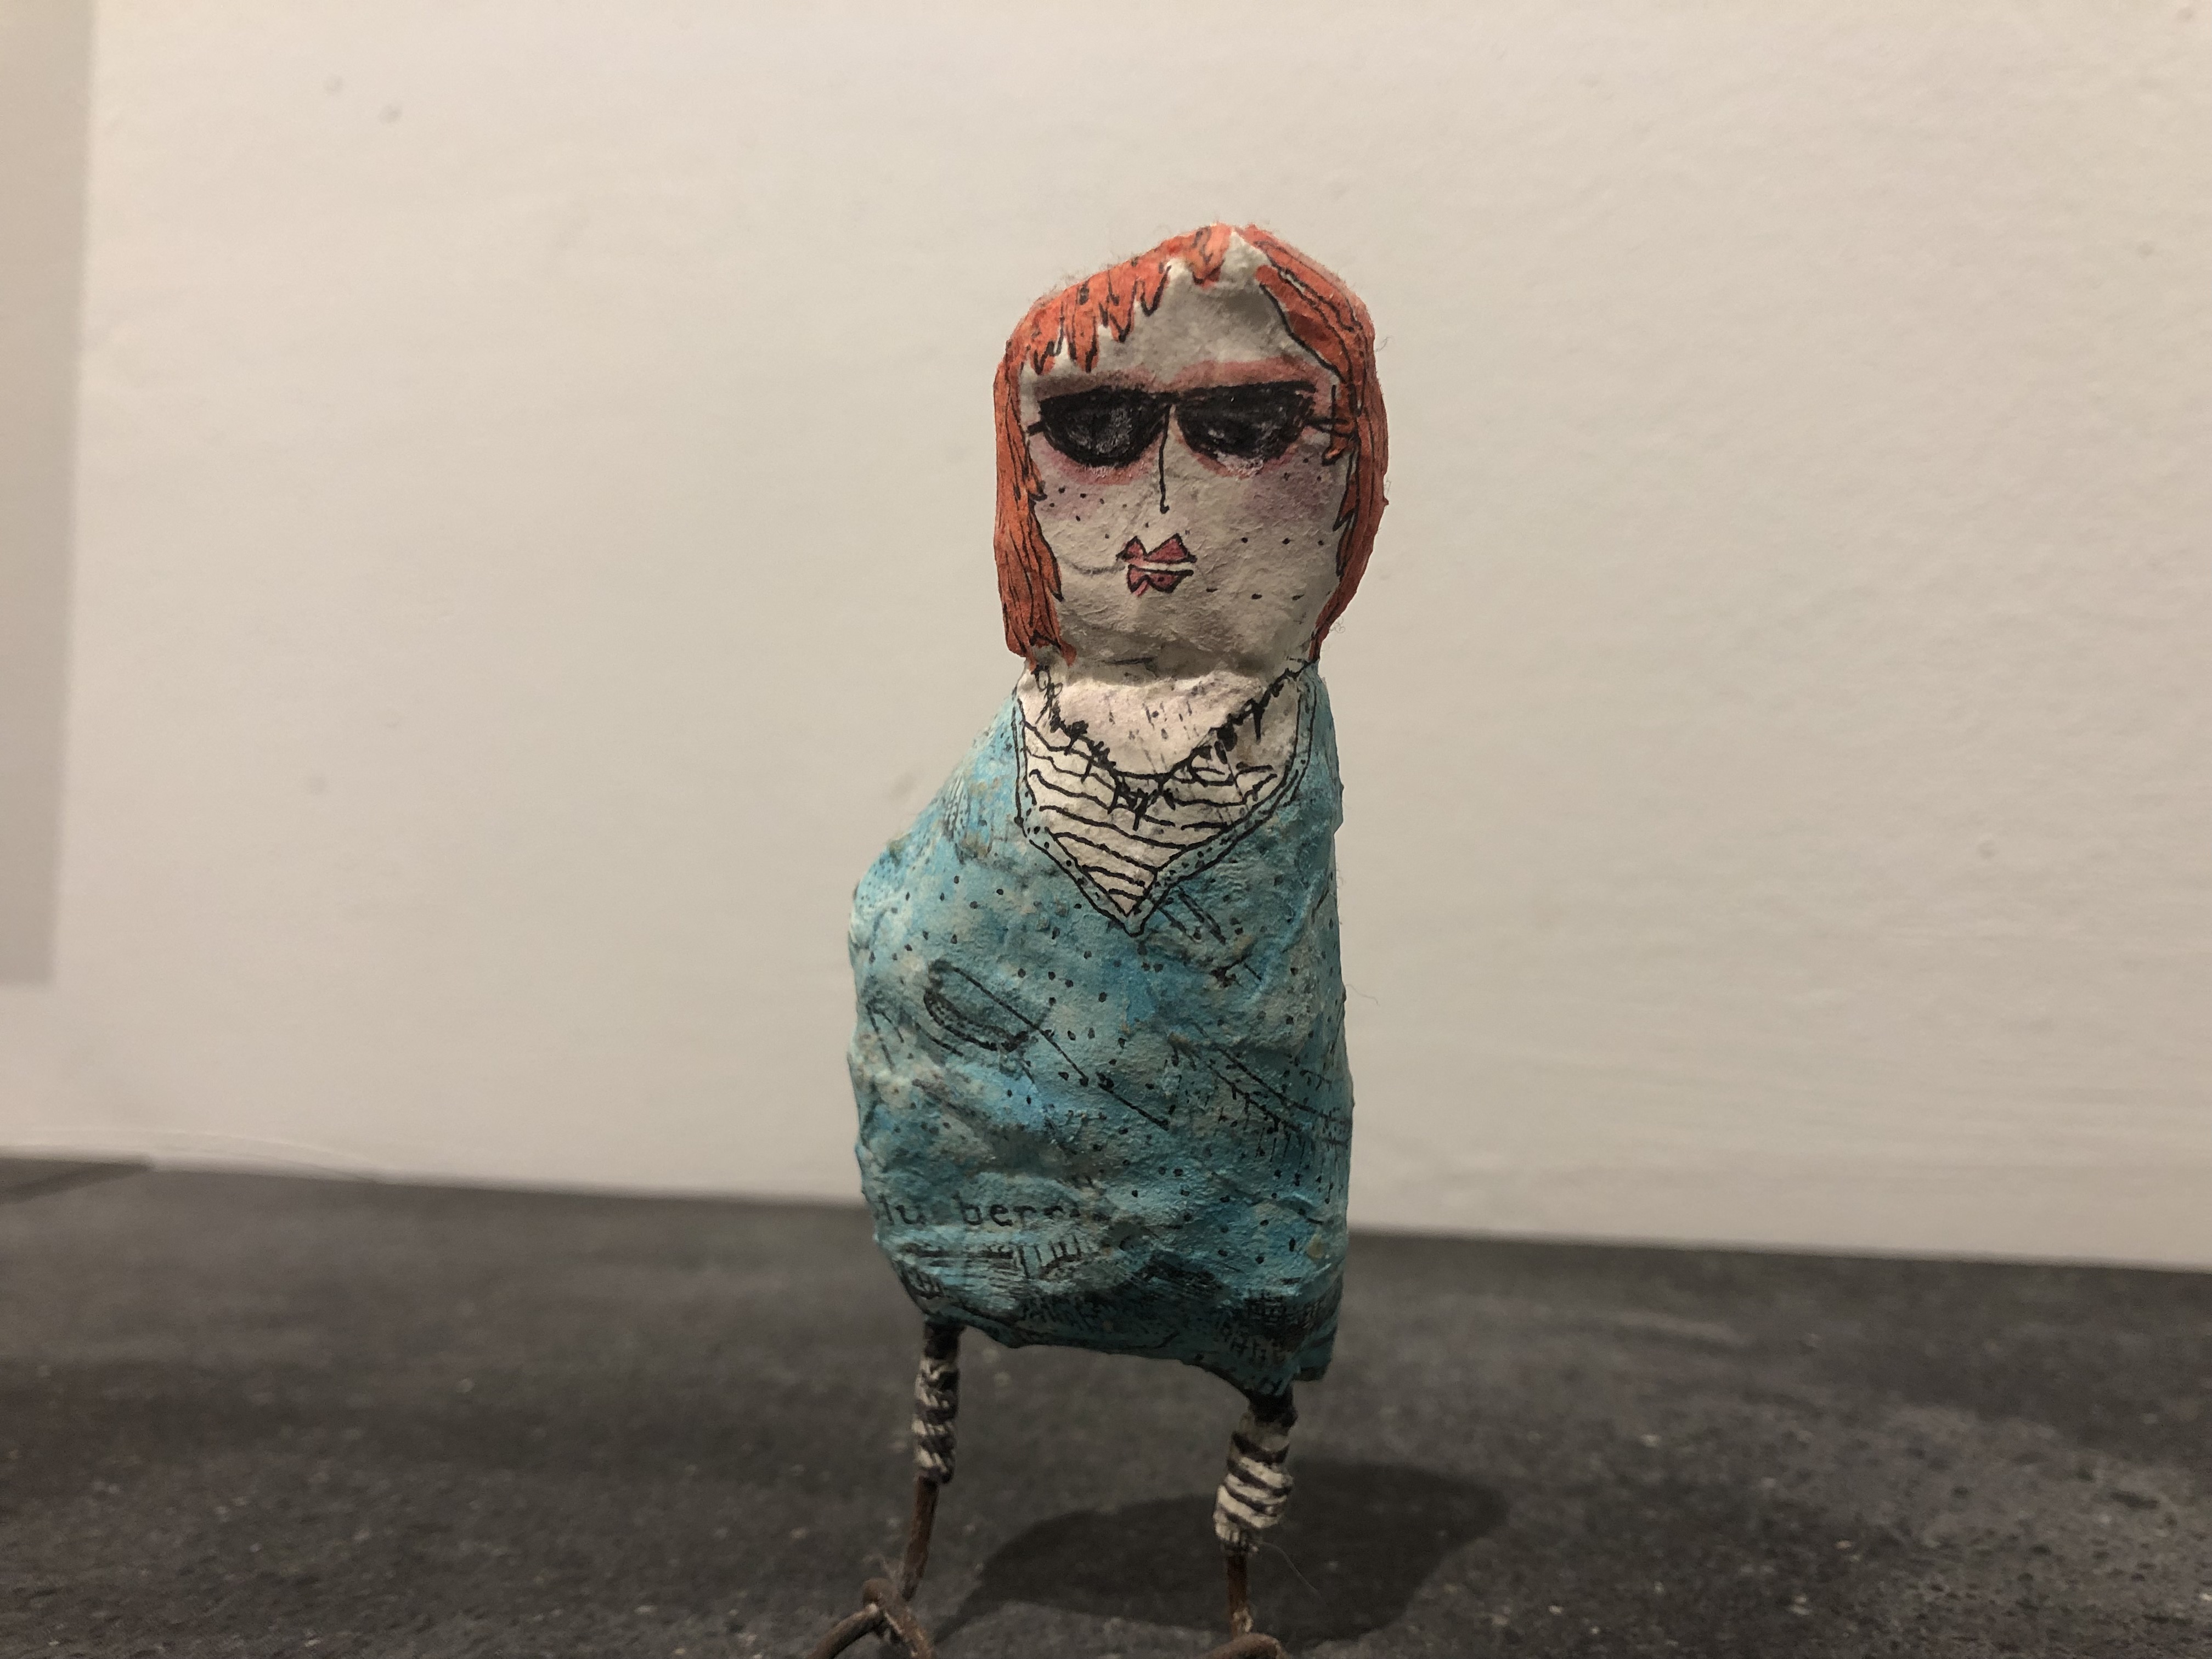 Paper-mache person with orange hair, sunglasses, and teal sweater.